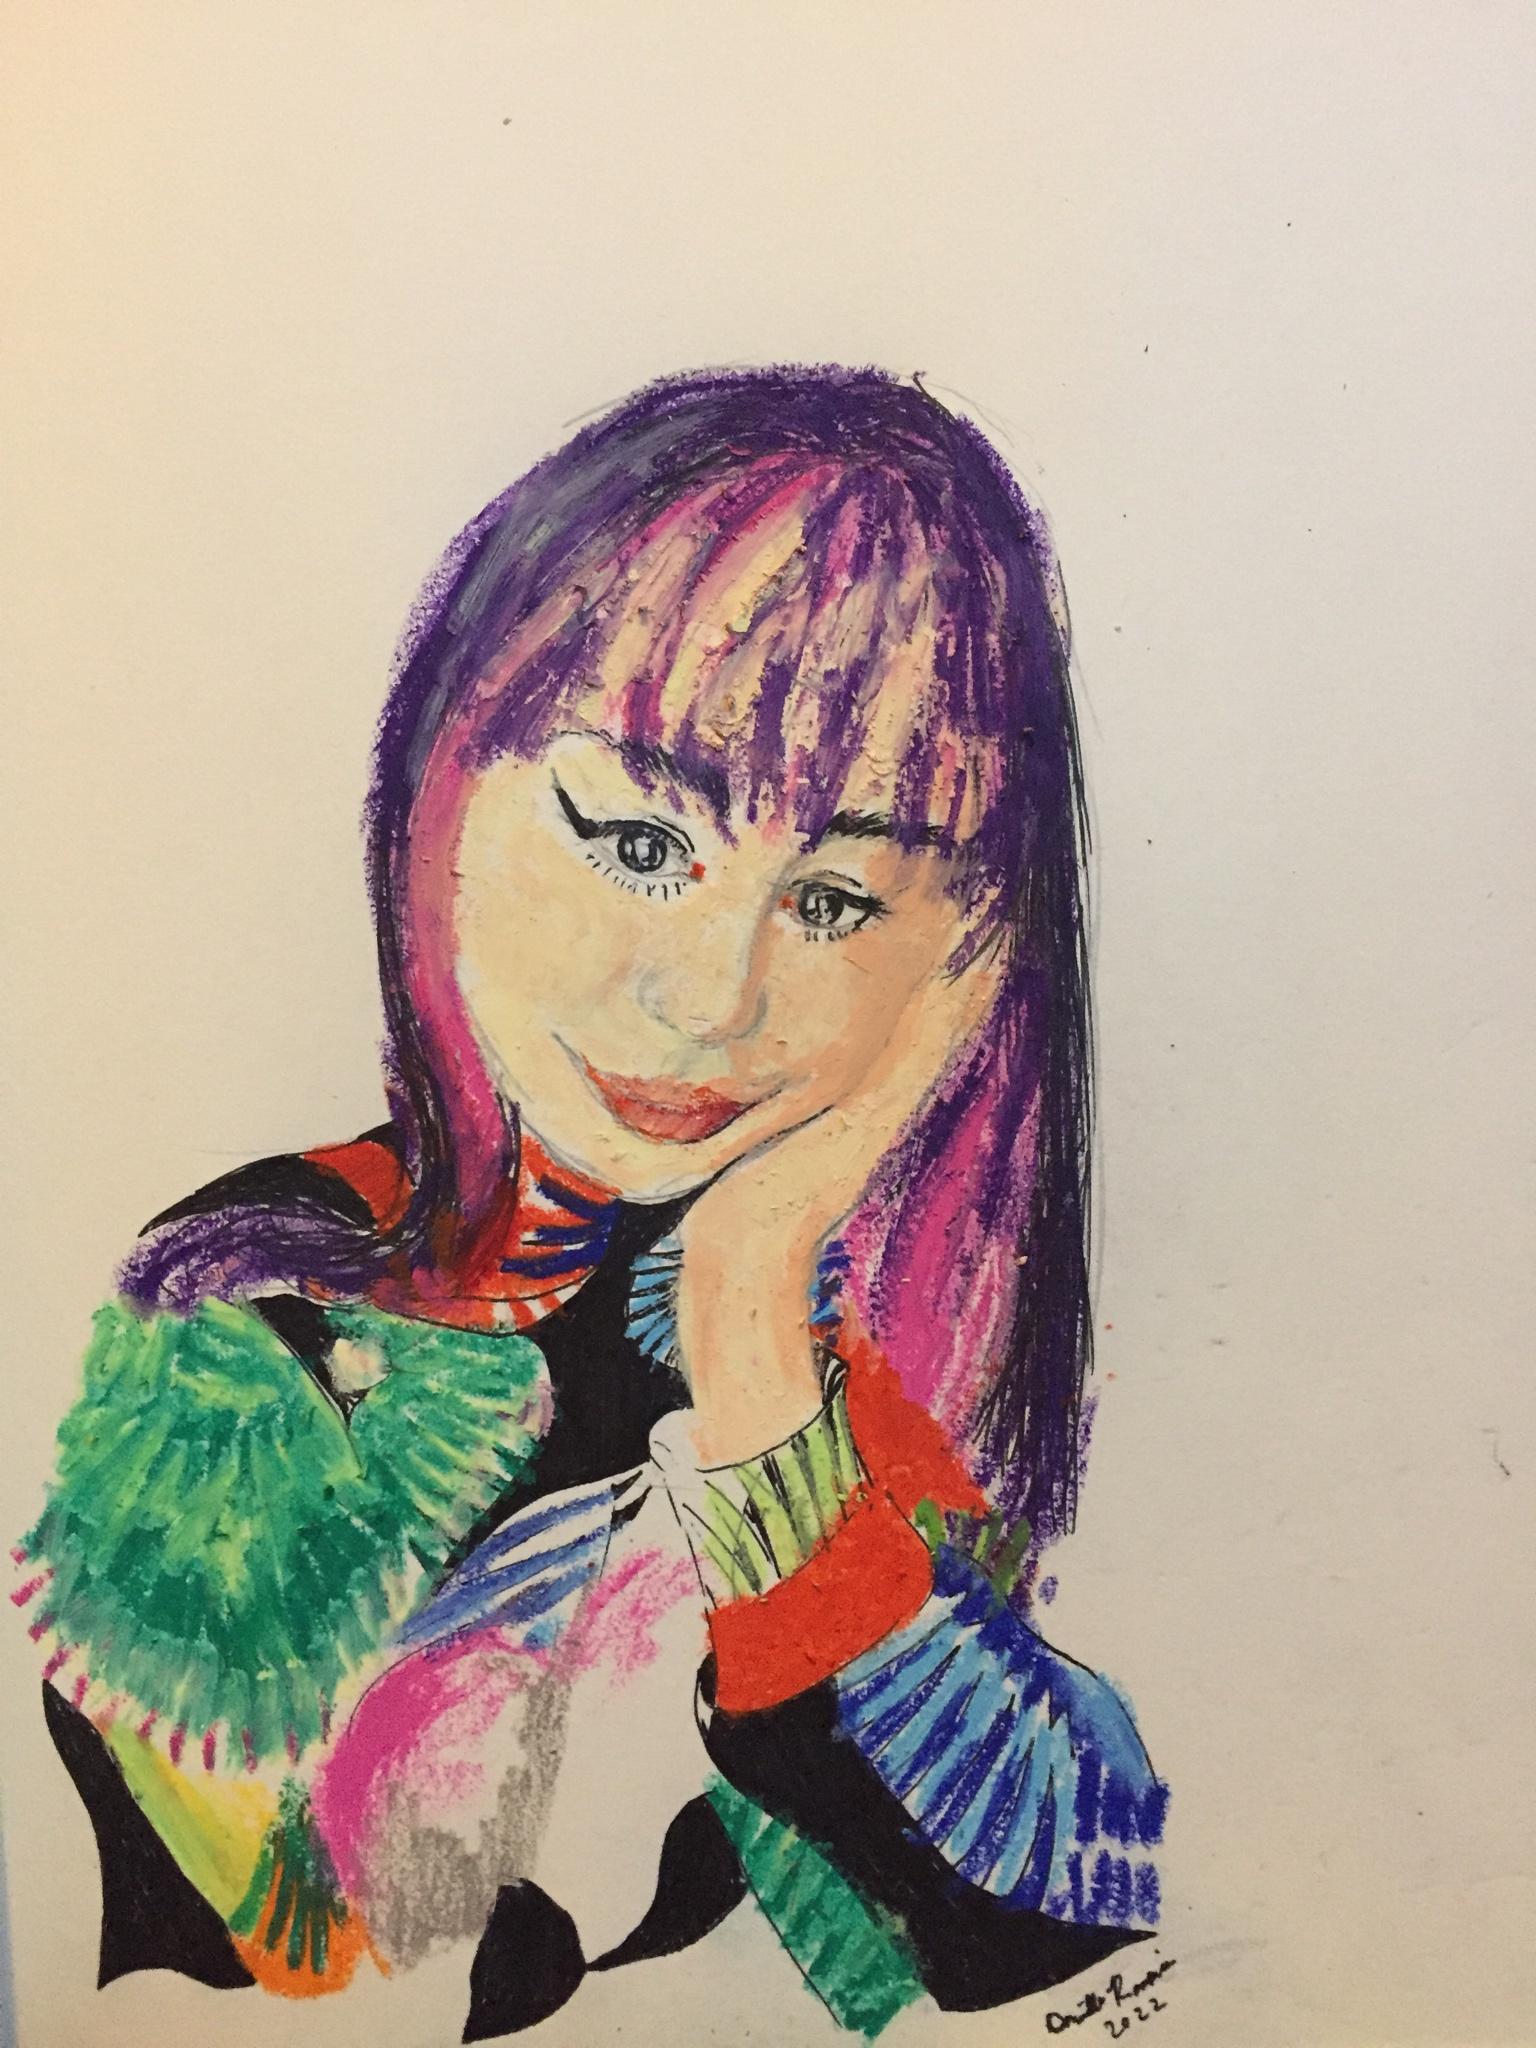 Portrait of a Girl Wearing Colorful Cloths, oil pastel, pencil and pen on paper